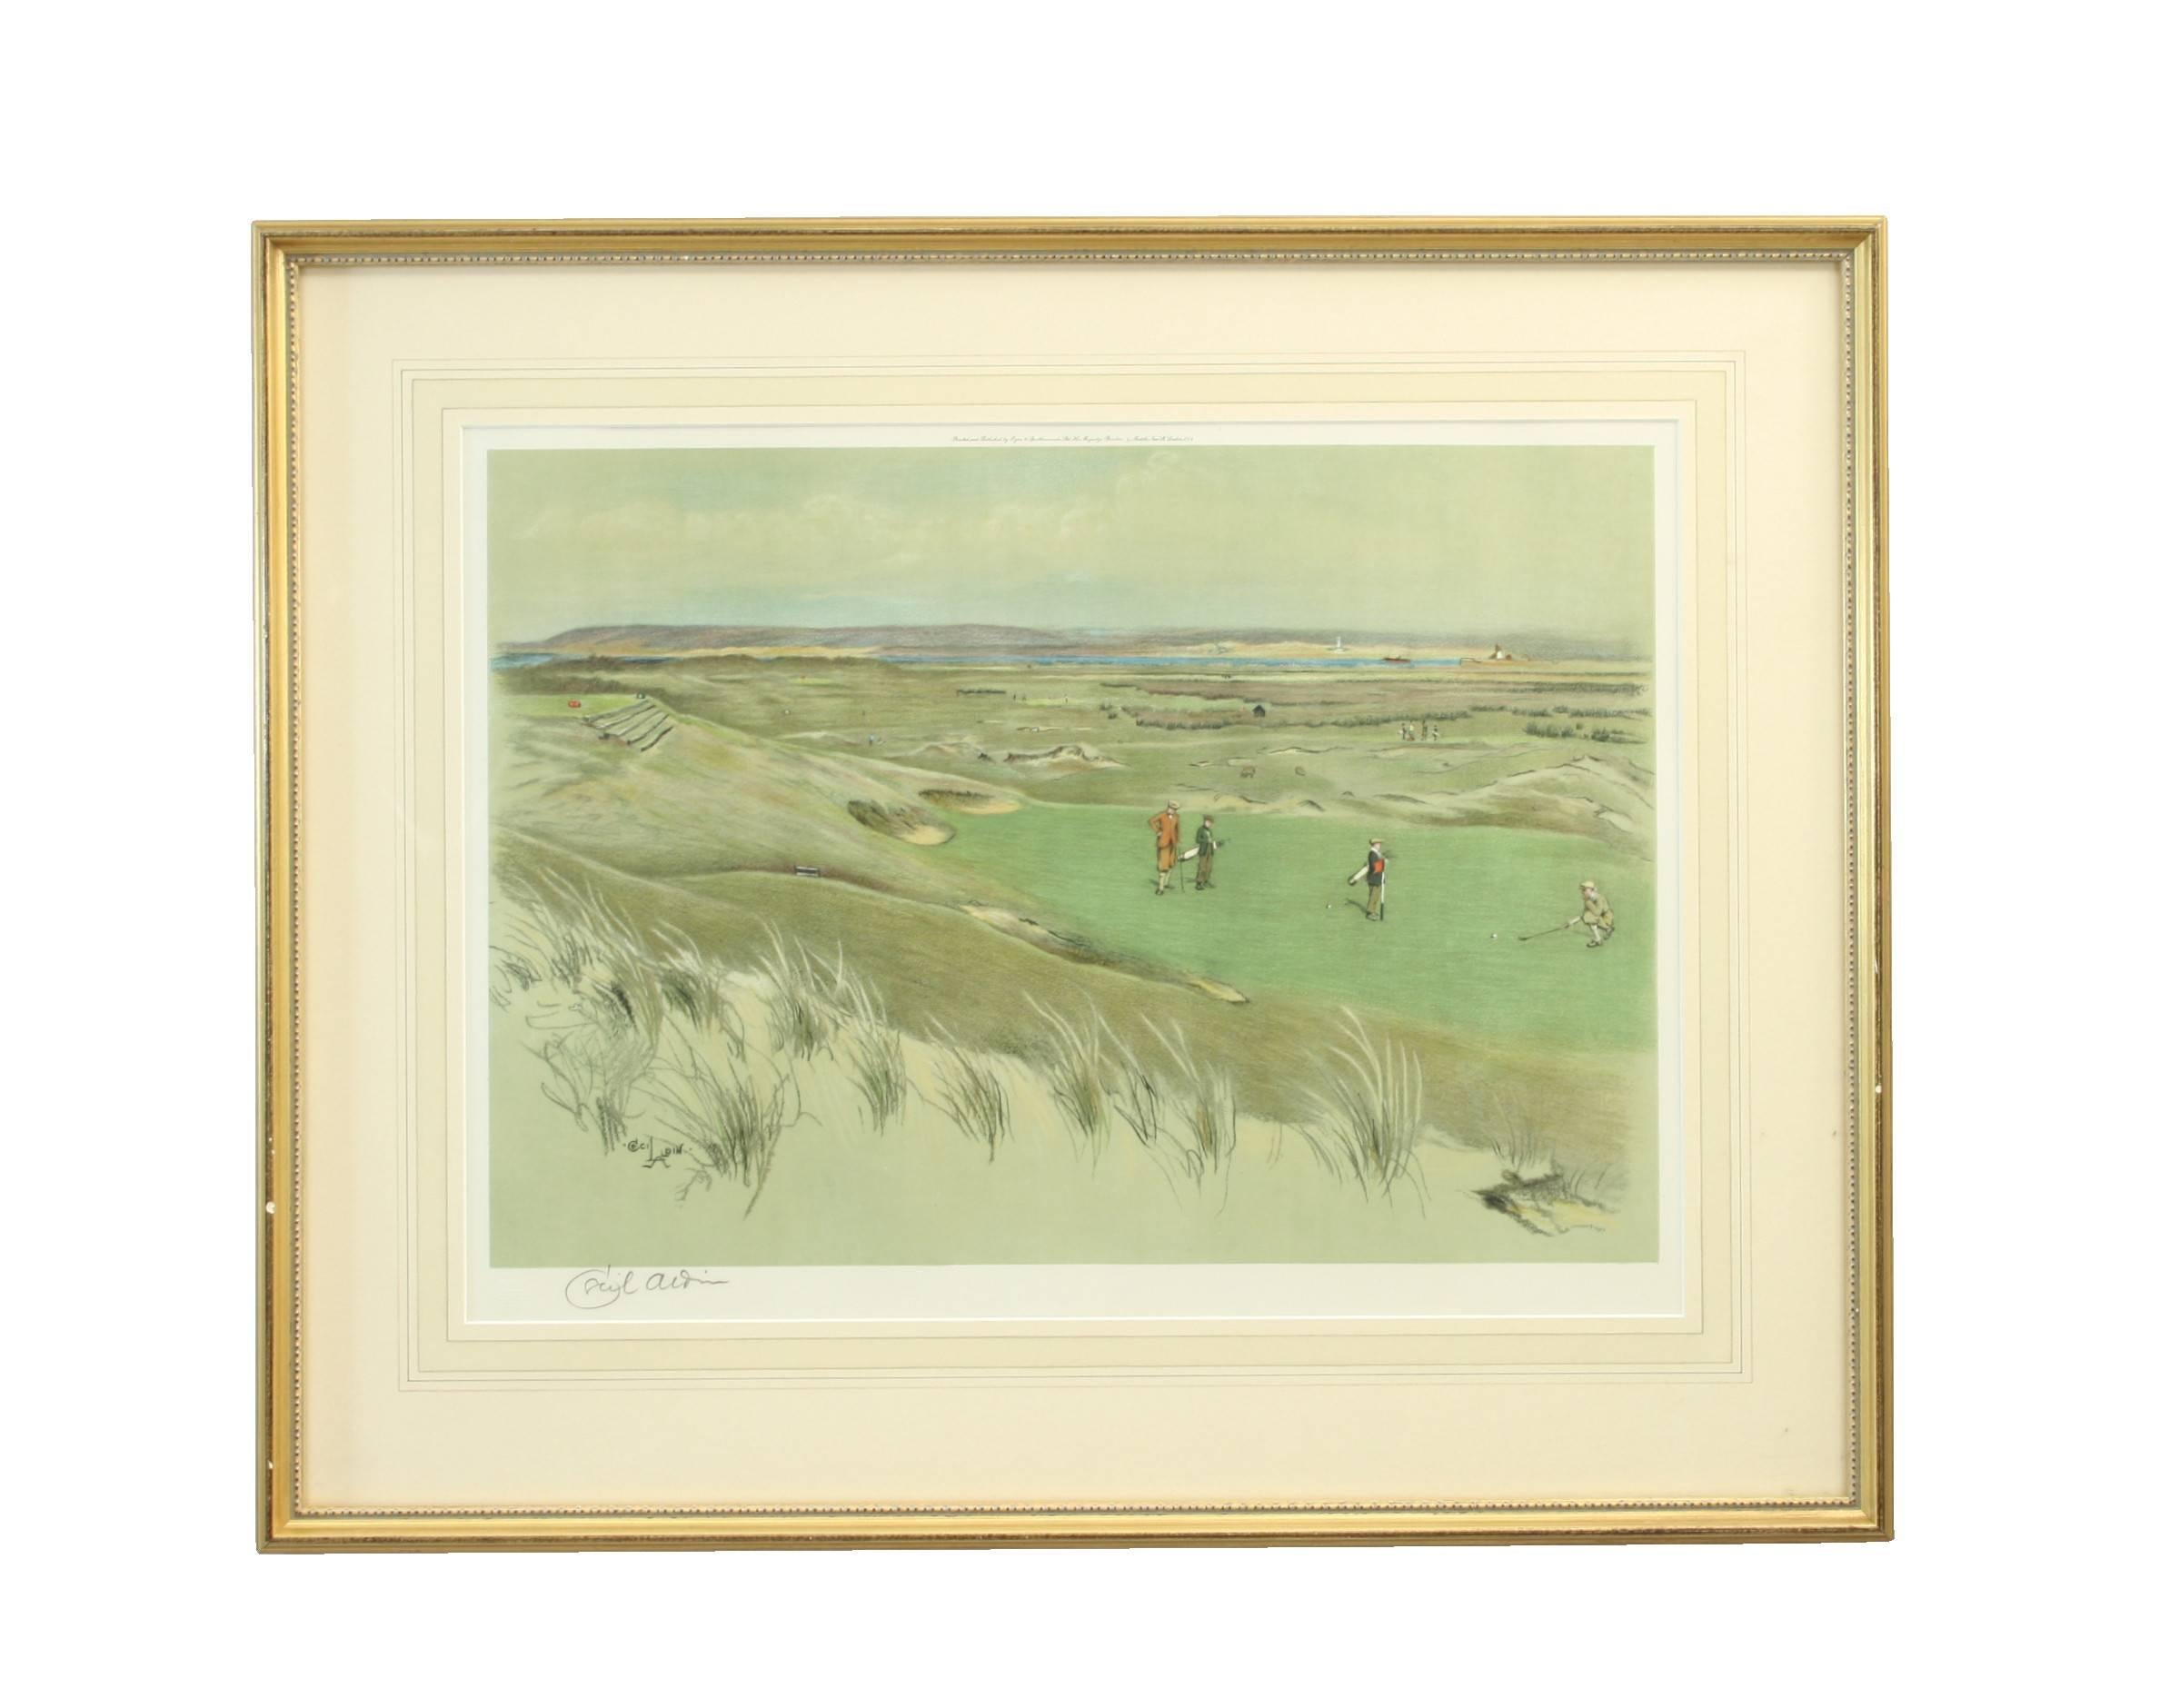 A mounted and framed golf photolithograph of Westward Ho! (the sixth green), after Cecil Aldin. Signed in pencil by the artist. Printed and published by Eyre & Spottiswoode, Ltd., His Majesty's printers. Four Middle New Street, London,